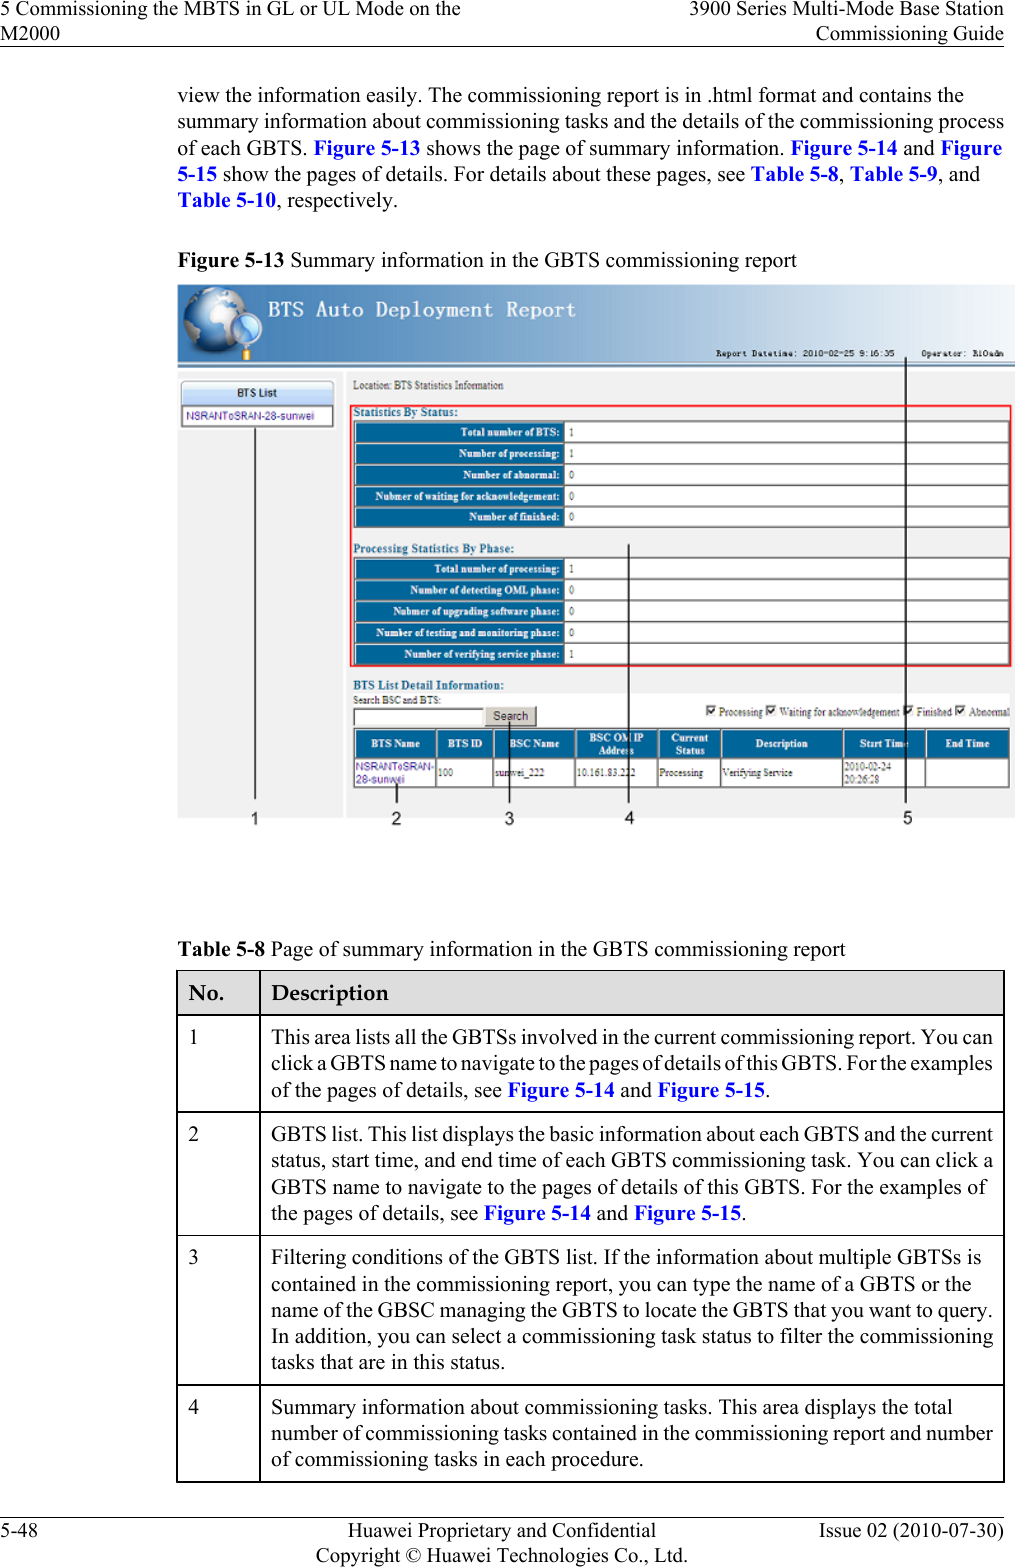 view the information easily. The commissioning report is in .html format and contains thesummary information about commissioning tasks and the details of the commissioning processof each GBTS. Figure 5-13 shows the page of summary information. Figure 5-14 and Figure5-15 show the pages of details. For details about these pages, see Table 5-8, Table 5-9, andTable 5-10, respectively.Figure 5-13 Summary information in the GBTS commissioning report Table 5-8 Page of summary information in the GBTS commissioning reportNo. Description1This area lists all the GBTSs involved in the current commissioning report. You canclick a GBTS name to navigate to the pages of details of this GBTS. For the examplesof the pages of details, see Figure 5-14 and Figure 5-15.2GBTS list. This list displays the basic information about each GBTS and the currentstatus, start time, and end time of each GBTS commissioning task. You can click aGBTS name to navigate to the pages of details of this GBTS. For the examples ofthe pages of details, see Figure 5-14 and Figure 5-15.3Filtering conditions of the GBTS list. If the information about multiple GBTSs iscontained in the commissioning report, you can type the name of a GBTS or thename of the GBSC managing the GBTS to locate the GBTS that you want to query.In addition, you can select a commissioning task status to filter the commissioningtasks that are in this status.4 Summary information about commissioning tasks. This area displays the totalnumber of commissioning tasks contained in the commissioning report and numberof commissioning tasks in each procedure.5 Commissioning the MBTS in GL or UL Mode on theM20003900 Series Multi-Mode Base StationCommissioning Guide5-48 Huawei Proprietary and ConfidentialCopyright © Huawei Technologies Co., Ltd.Issue 02 (2010-07-30)